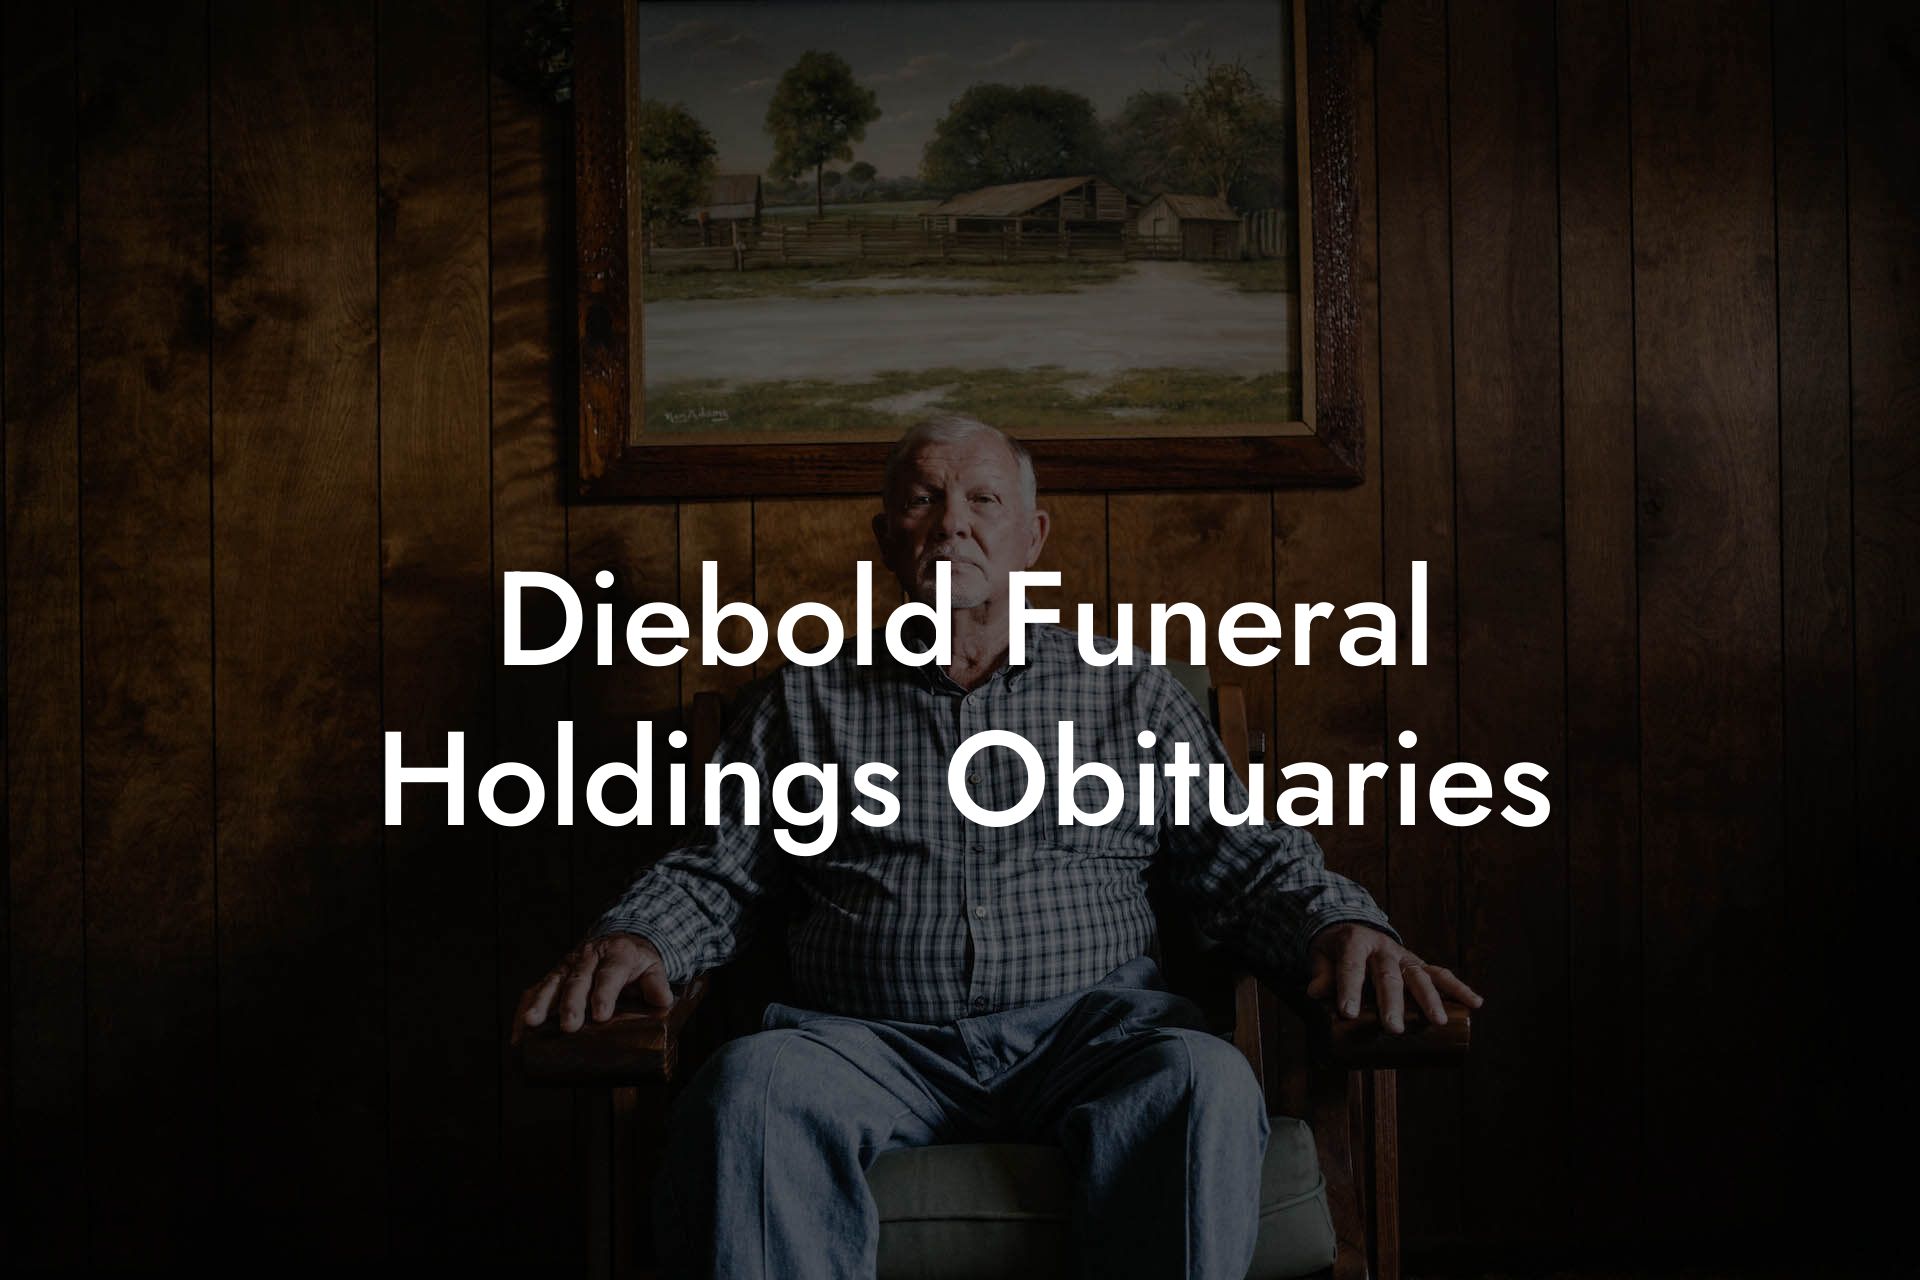 Diebold Funeral Holdings Obituaries